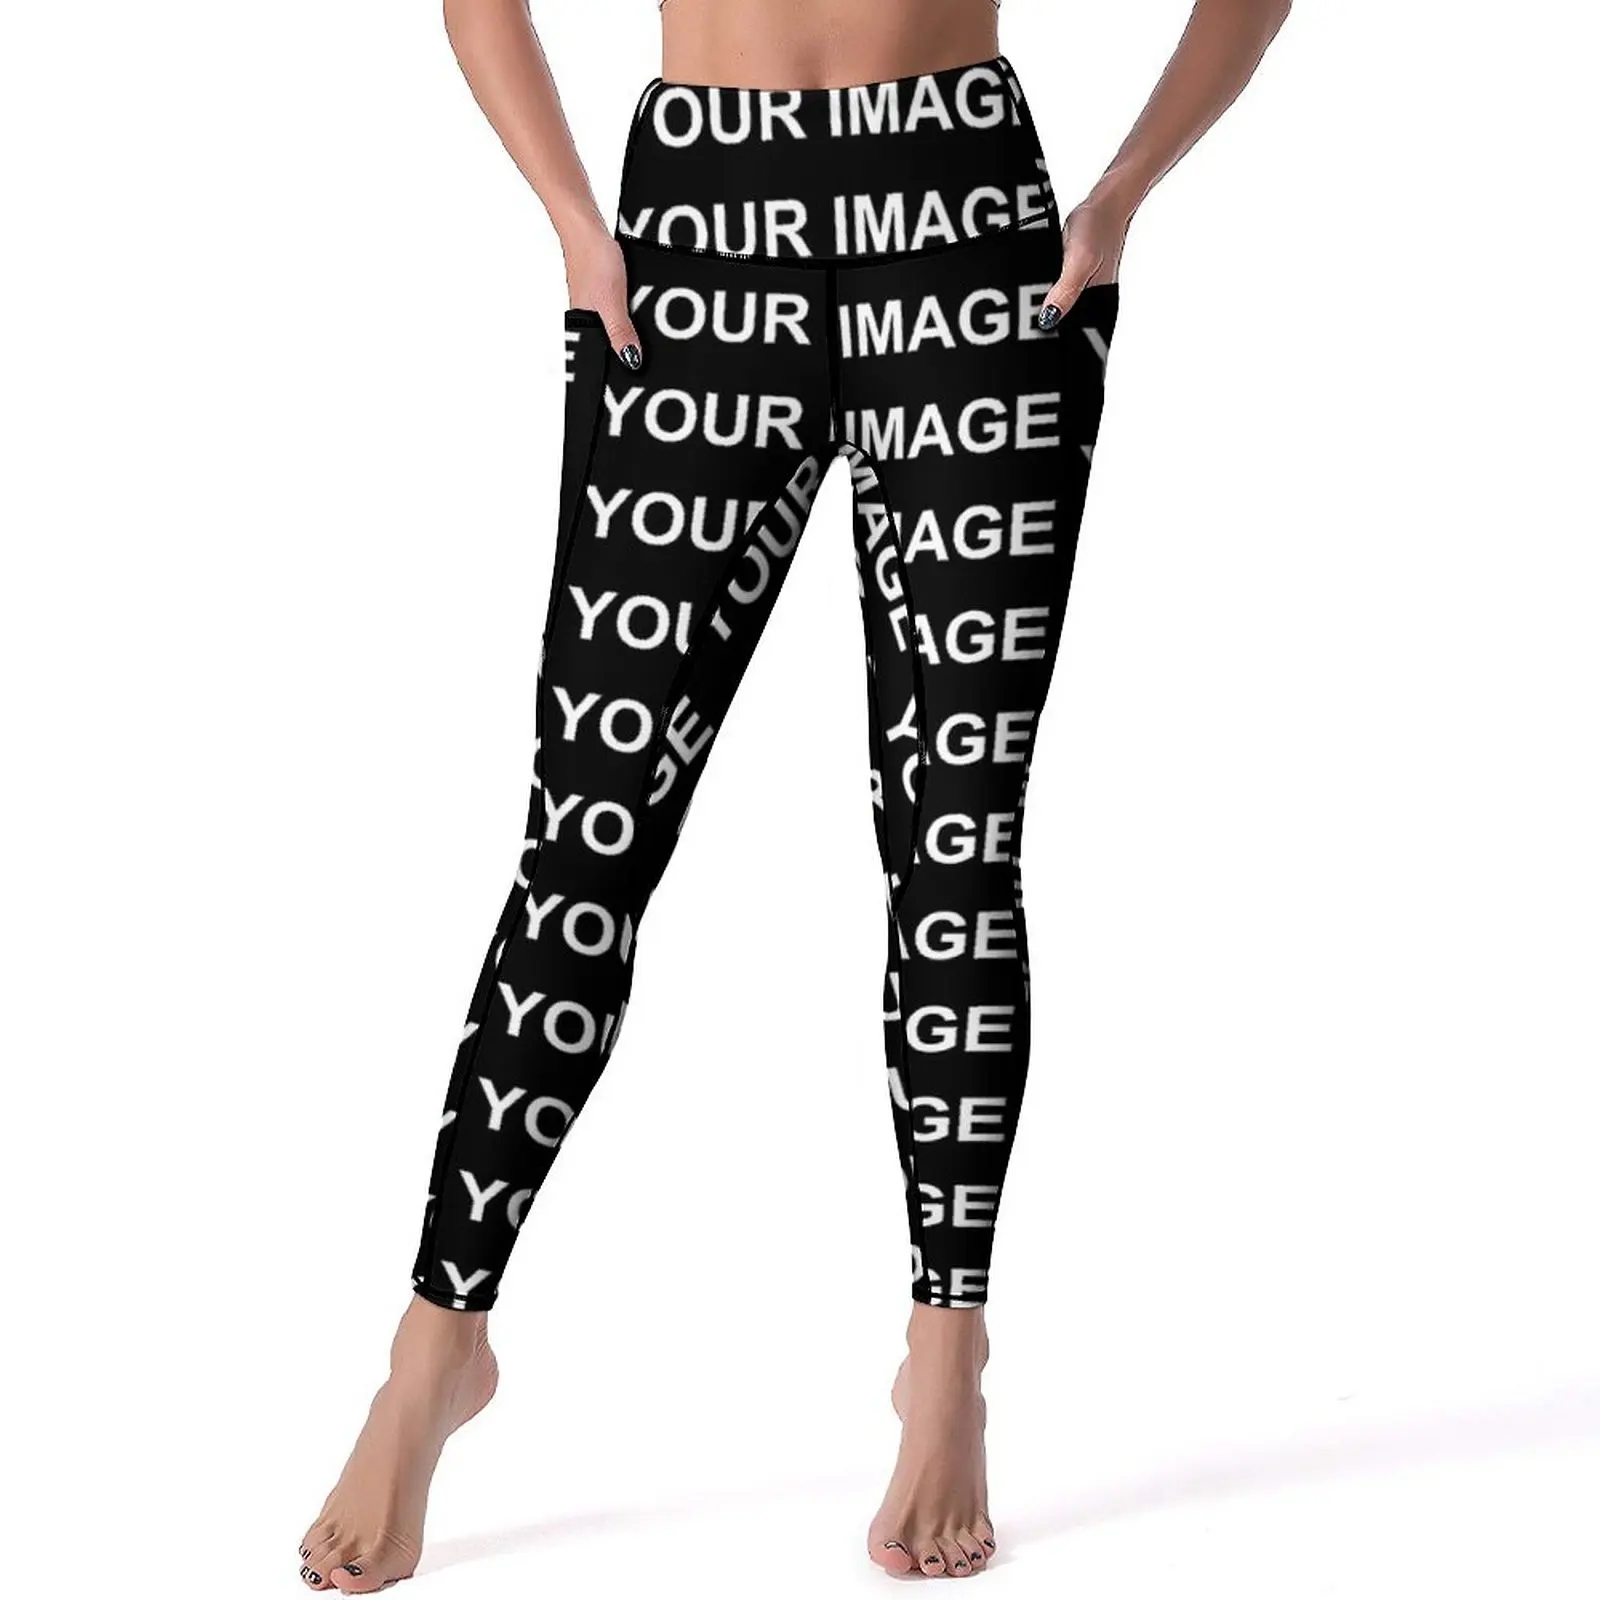 

Your Image Customized Leggings Sexy Custom Made Design High Waist Yoga Pants Stretchy Leggins Lady Fitness Running Sports Tights